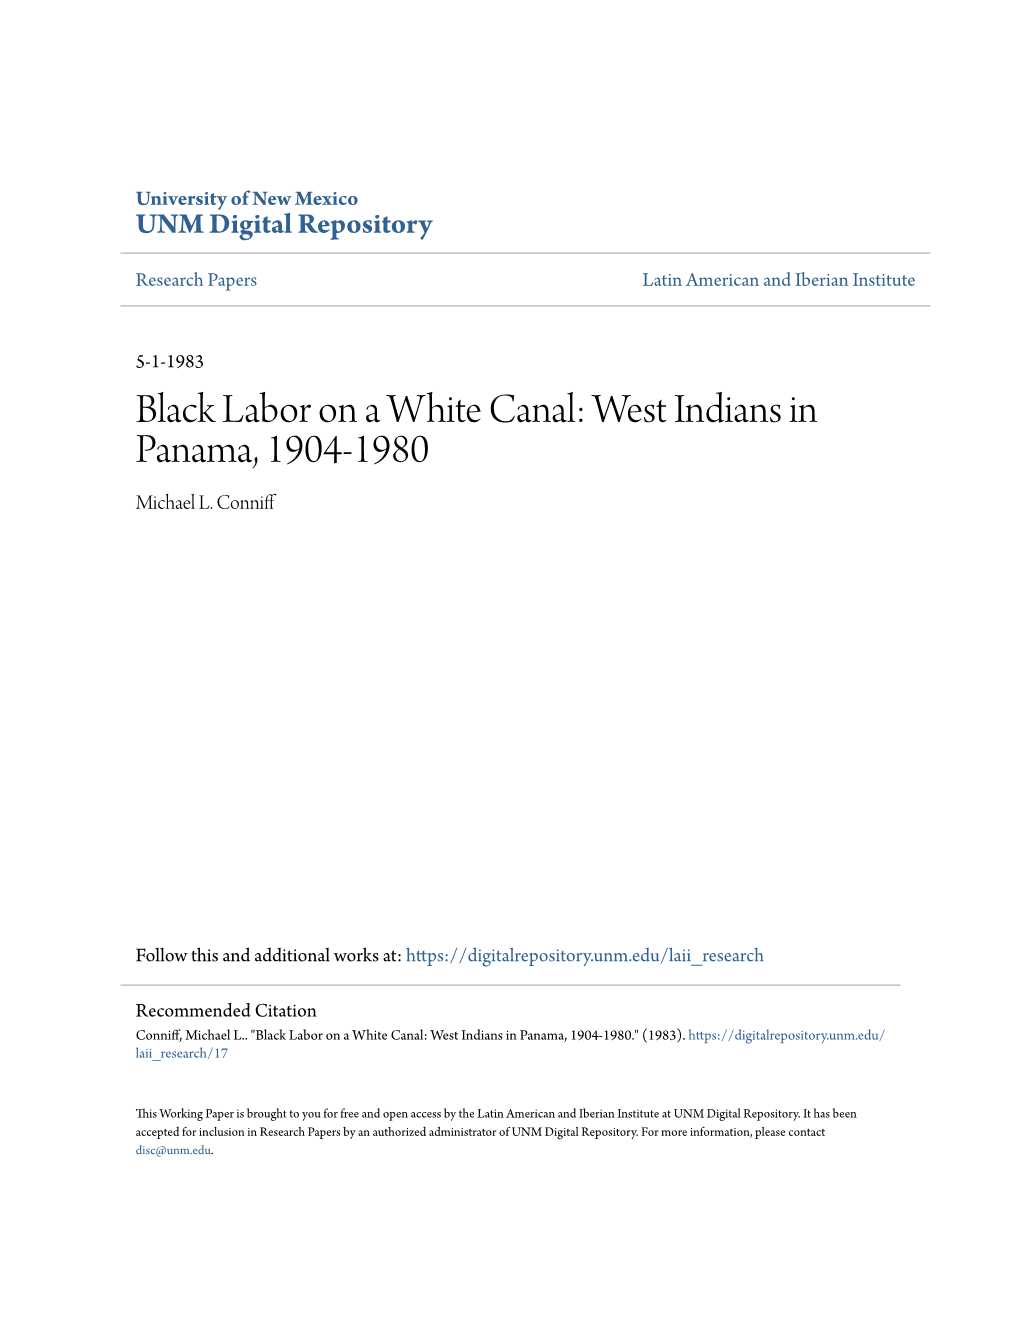 Black Labor on a White Canal: West Indians in Panama, 1904-1980 Michael L